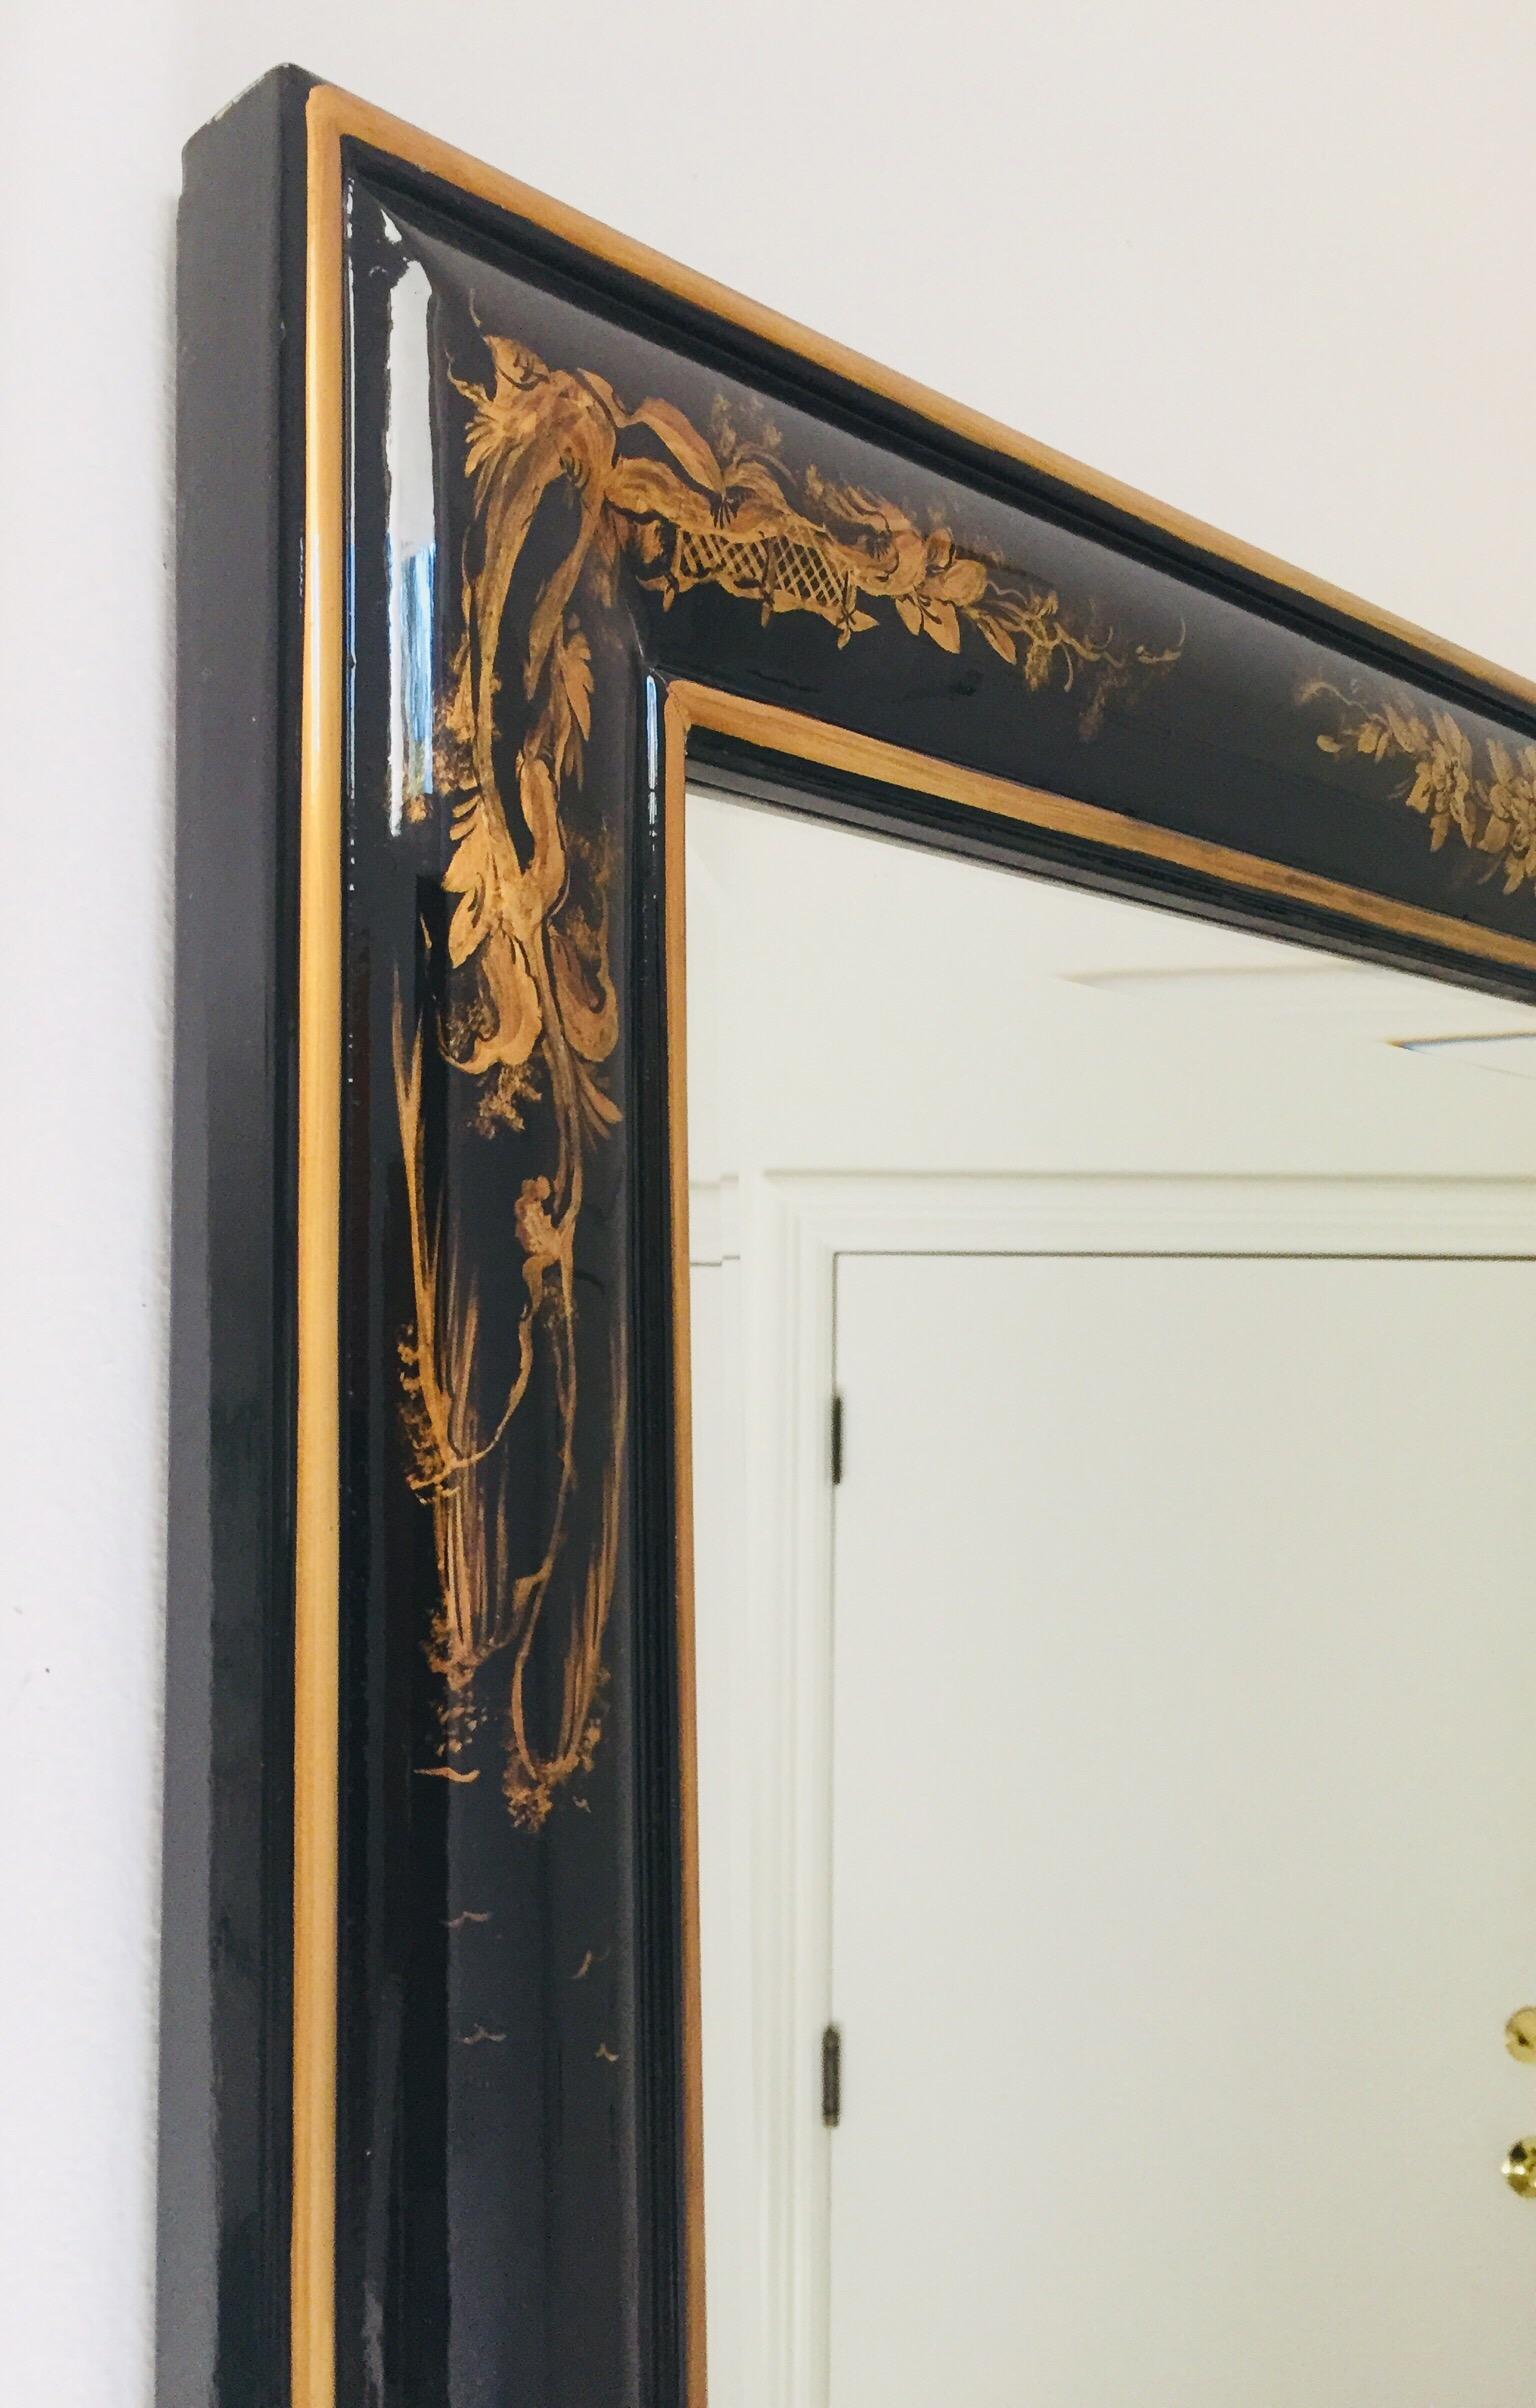 Beautiful chinoiserie Asian inspired rectangular framed mirror made by Labarge.
Labarge is known for their high quality mirrors, table lamps and other home decor throughout the 20th century.
Hand painted chinoiserie mirror with black and gold